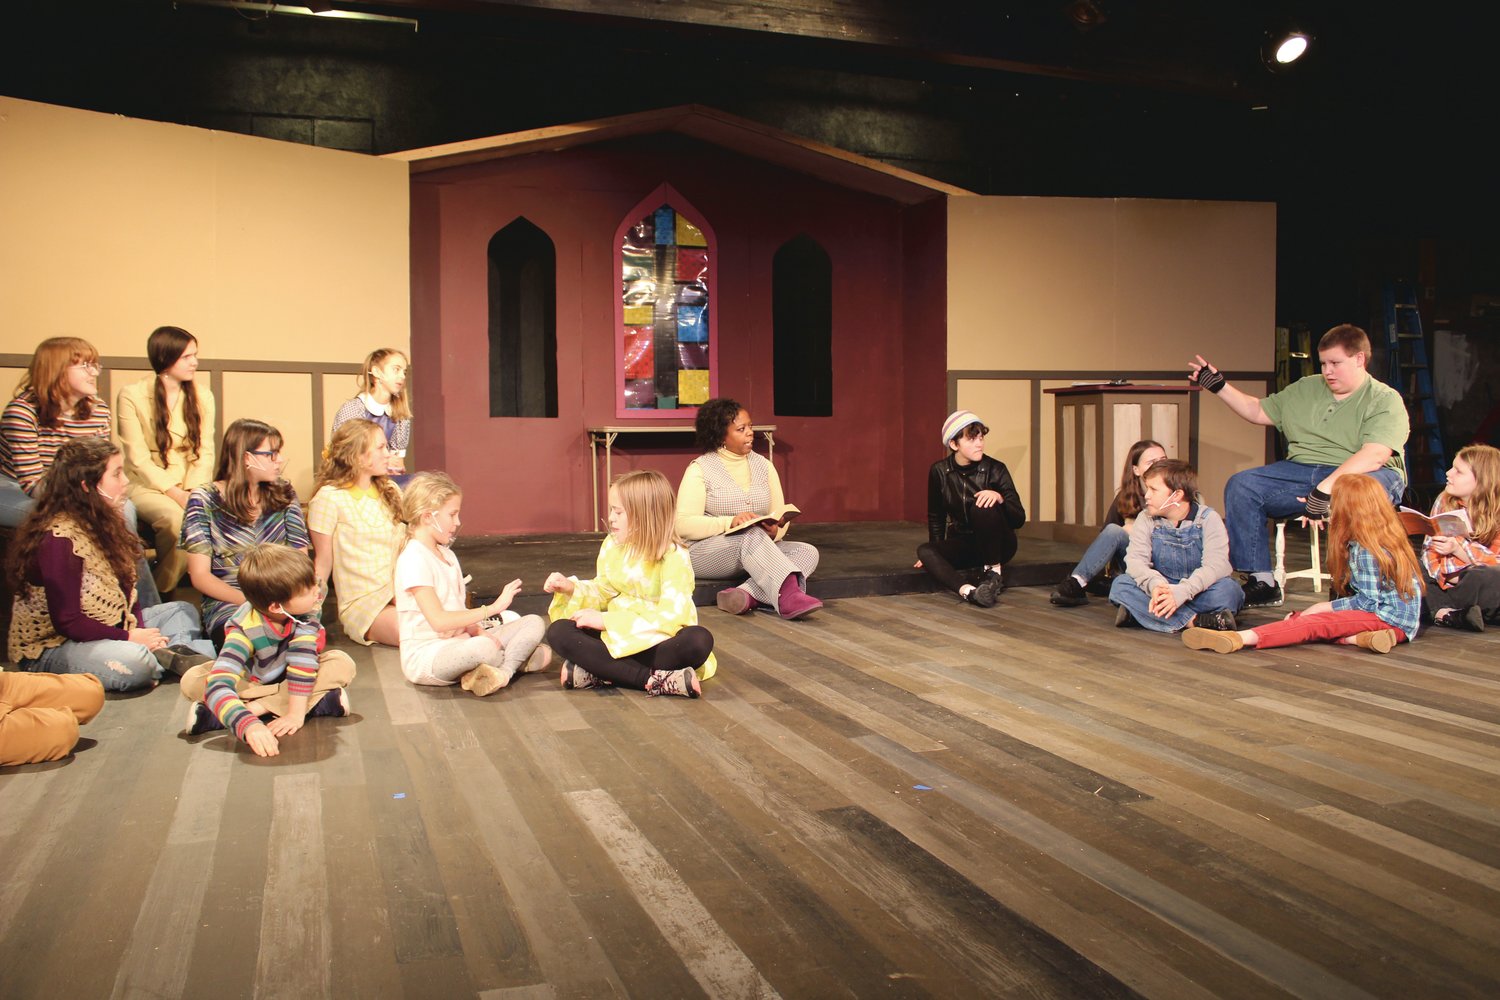 Grace Bradley (portrayed by Andrea Weston-Smart) attempts to teach the Sunday school class, including the rowdy Herdmans, the meaning of Christmas in "The Best Christmas Pageant Ever" opening Dec. 3 at the Evergreen Playhouse in Centralia.